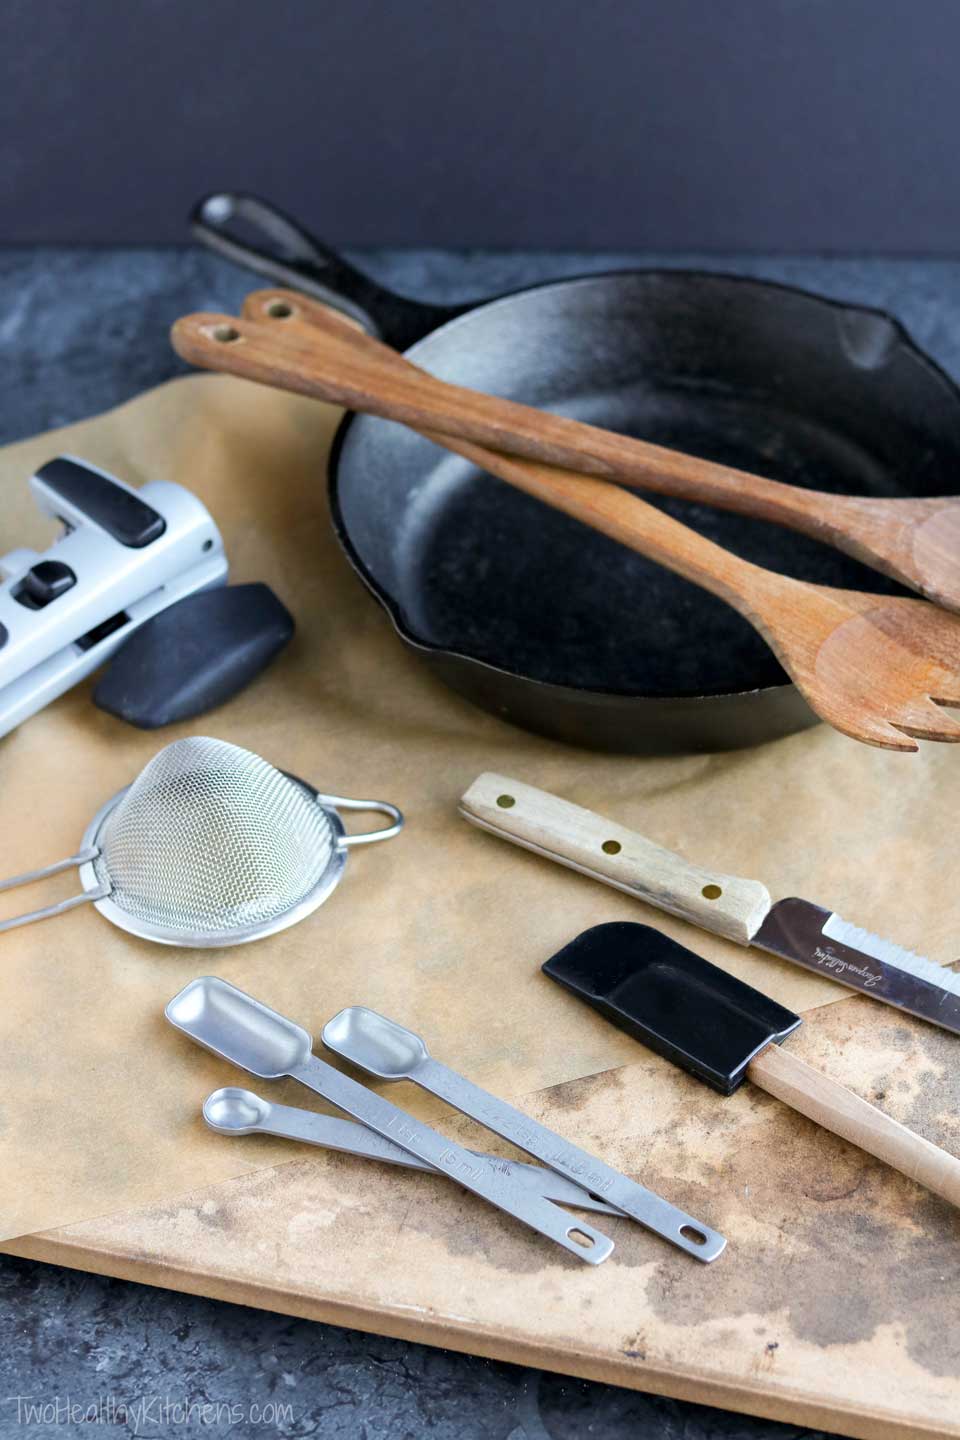 Cooking doesn’t have to be complicated – a few simple tools and a few basic skills are all you need to make a start!